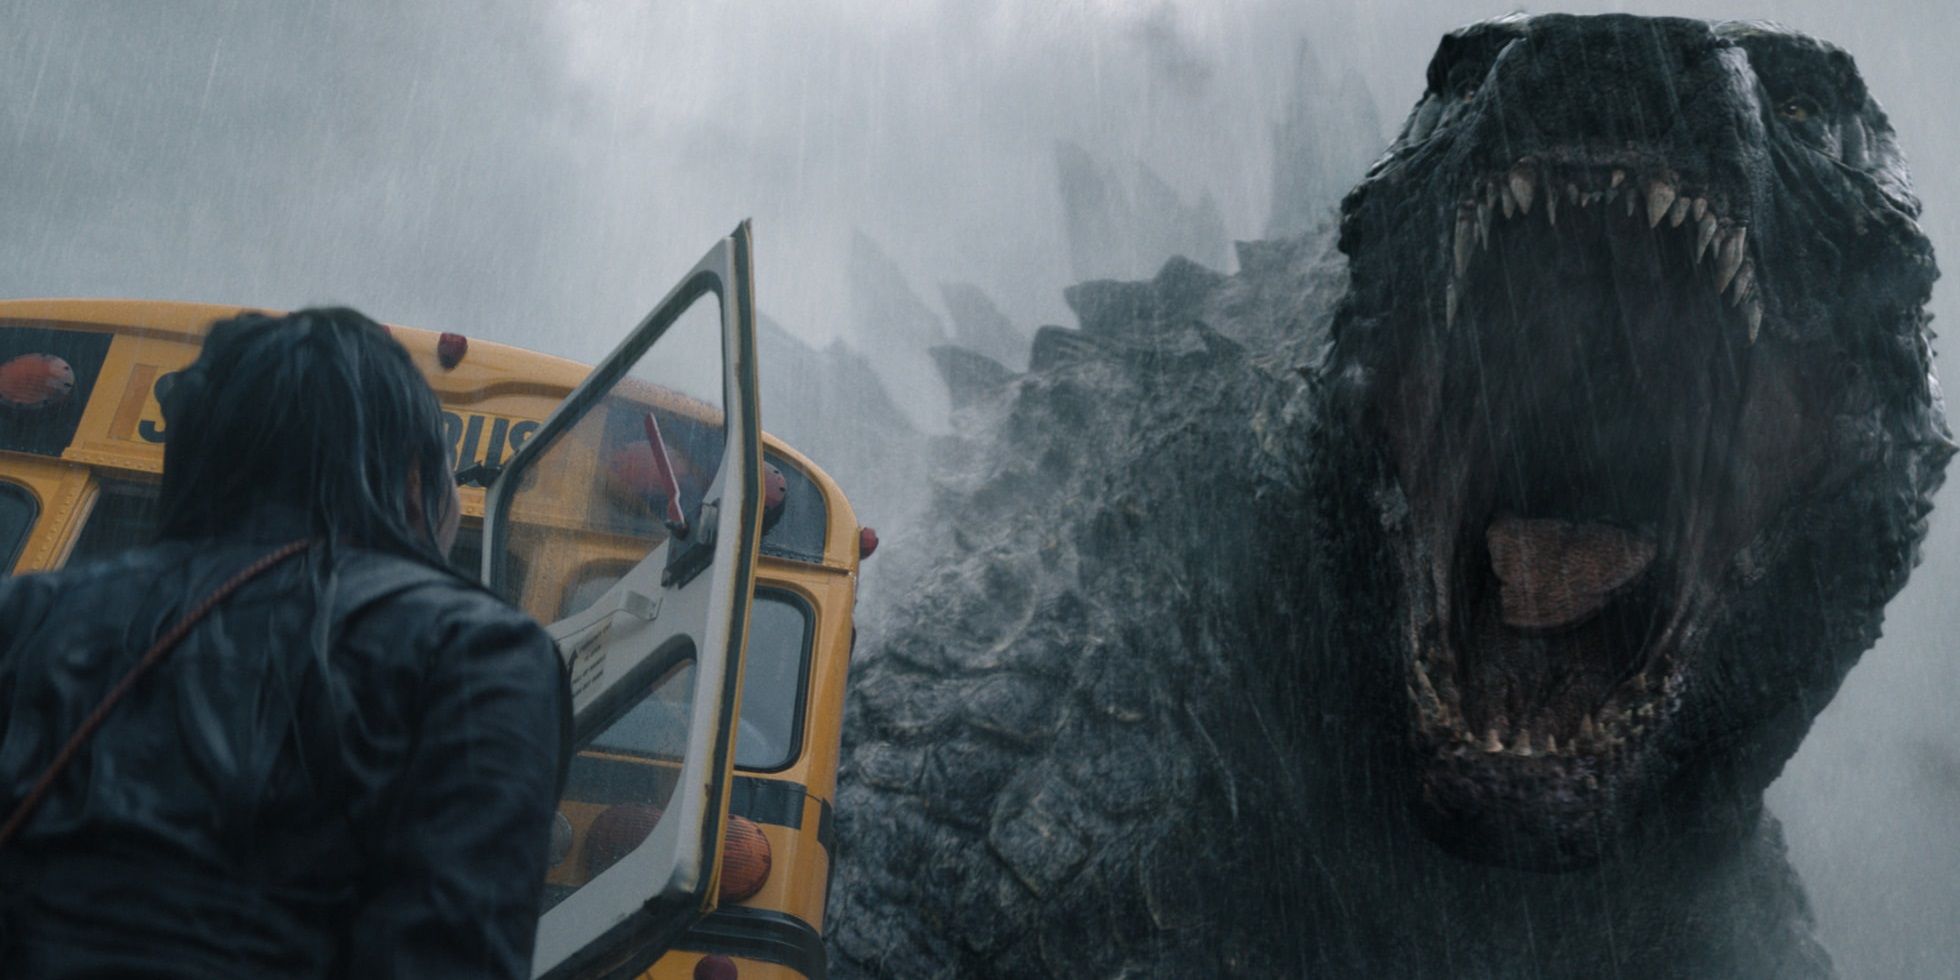 Godzilla roars next to a school bus in Monarch Legacy of Monsters